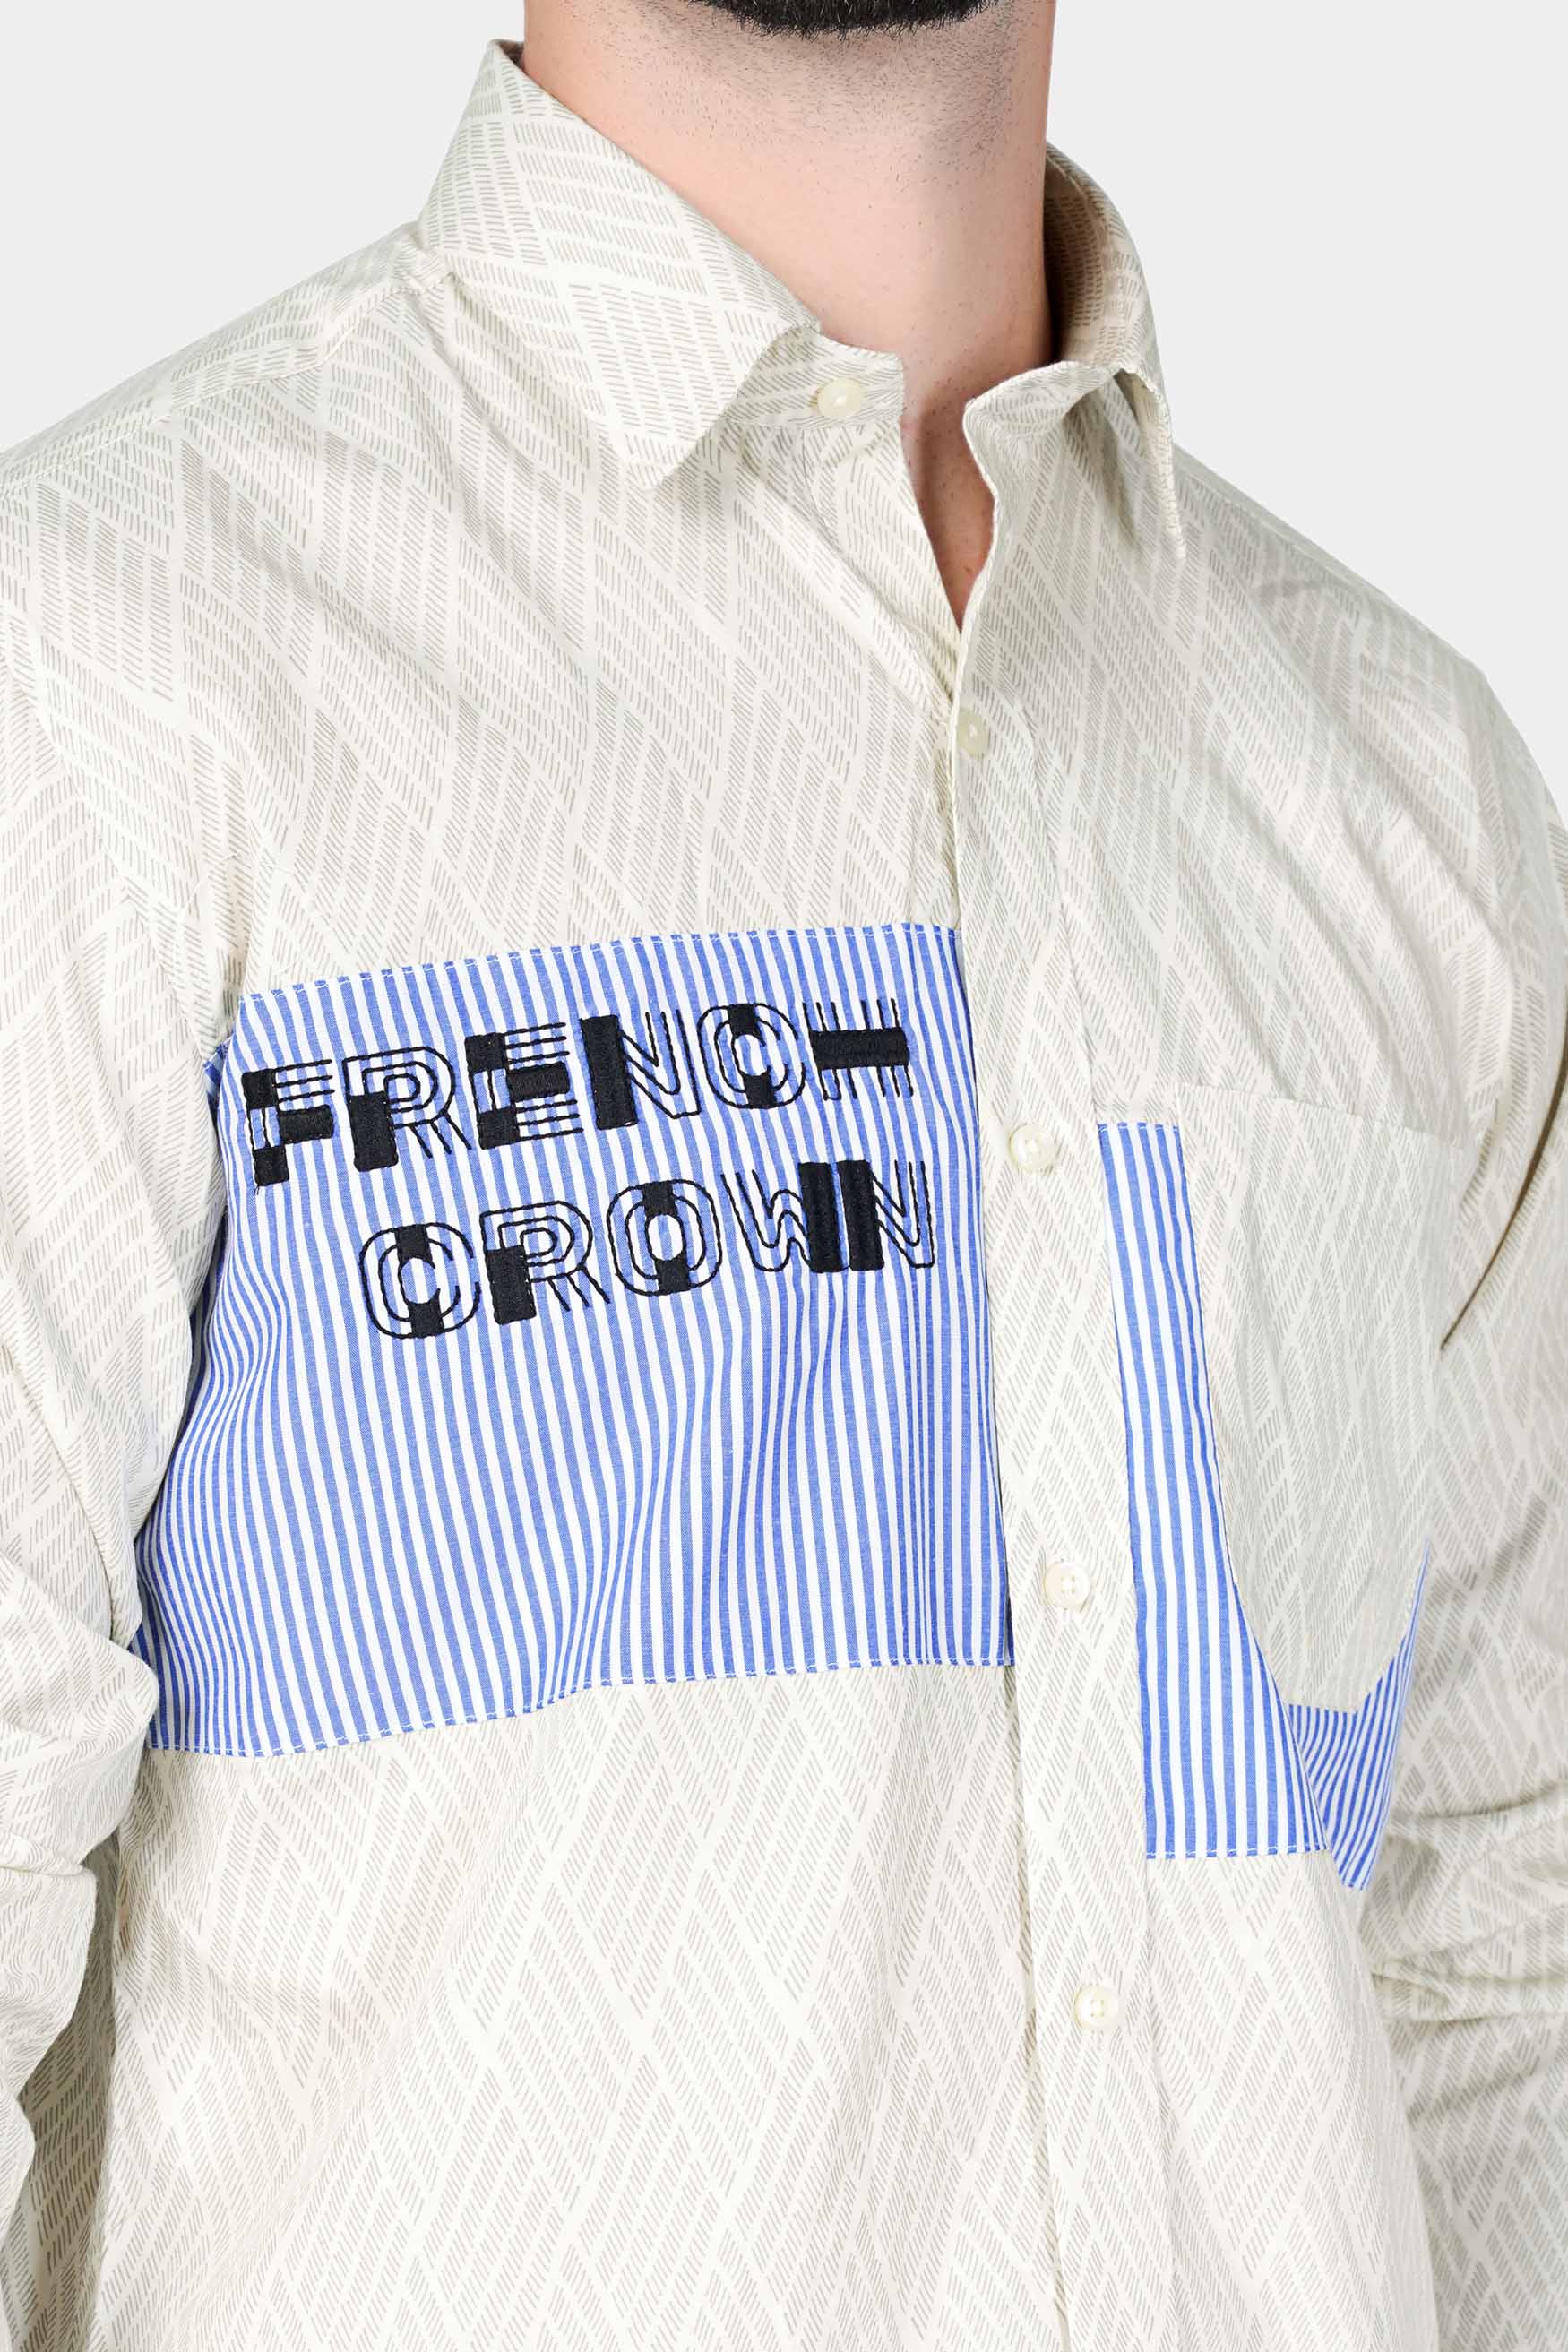 Gainsboro Gray and Glaucous Blue Striped Brand Name Embroidered Premium Cotton Designer Shirt 8204-P7-E333-38, 8204-P7-E333-H-38, 8204-P7-E333-39, 8204-P7-E333-H-39, 8204-P7-E333-40, 8204-P7-E333-H-40, 8204-P7-E333-42, 8204-P7-E333-H-42, 8204-P7-E333-44, 8204-P7-E333-H-44, 8204-P7-E333-46, 8204-P7-E333-H-46, 8204-P7-E333-48, 8204-P7-E333-H-48, 8204-P7-E333-50, 8204-P7-E333-H-50, 8204-P7-E333-52, 8204-P7-E333-H-52